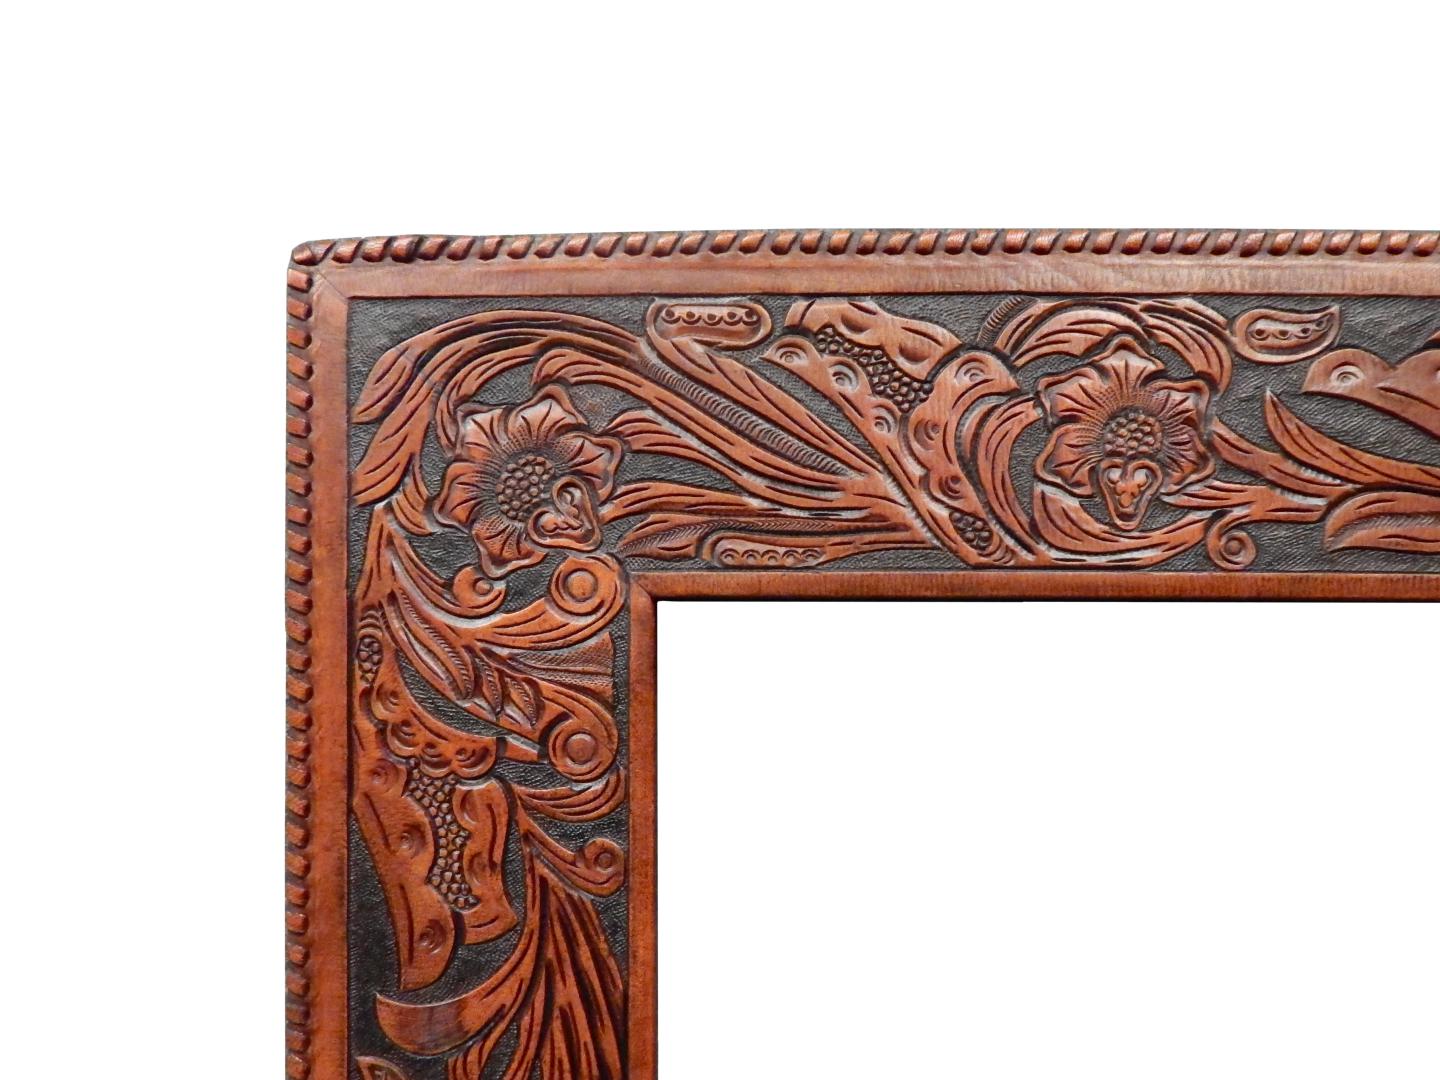 leather frame with hand tooled/tooling western floral design and hand stitch edge lacing